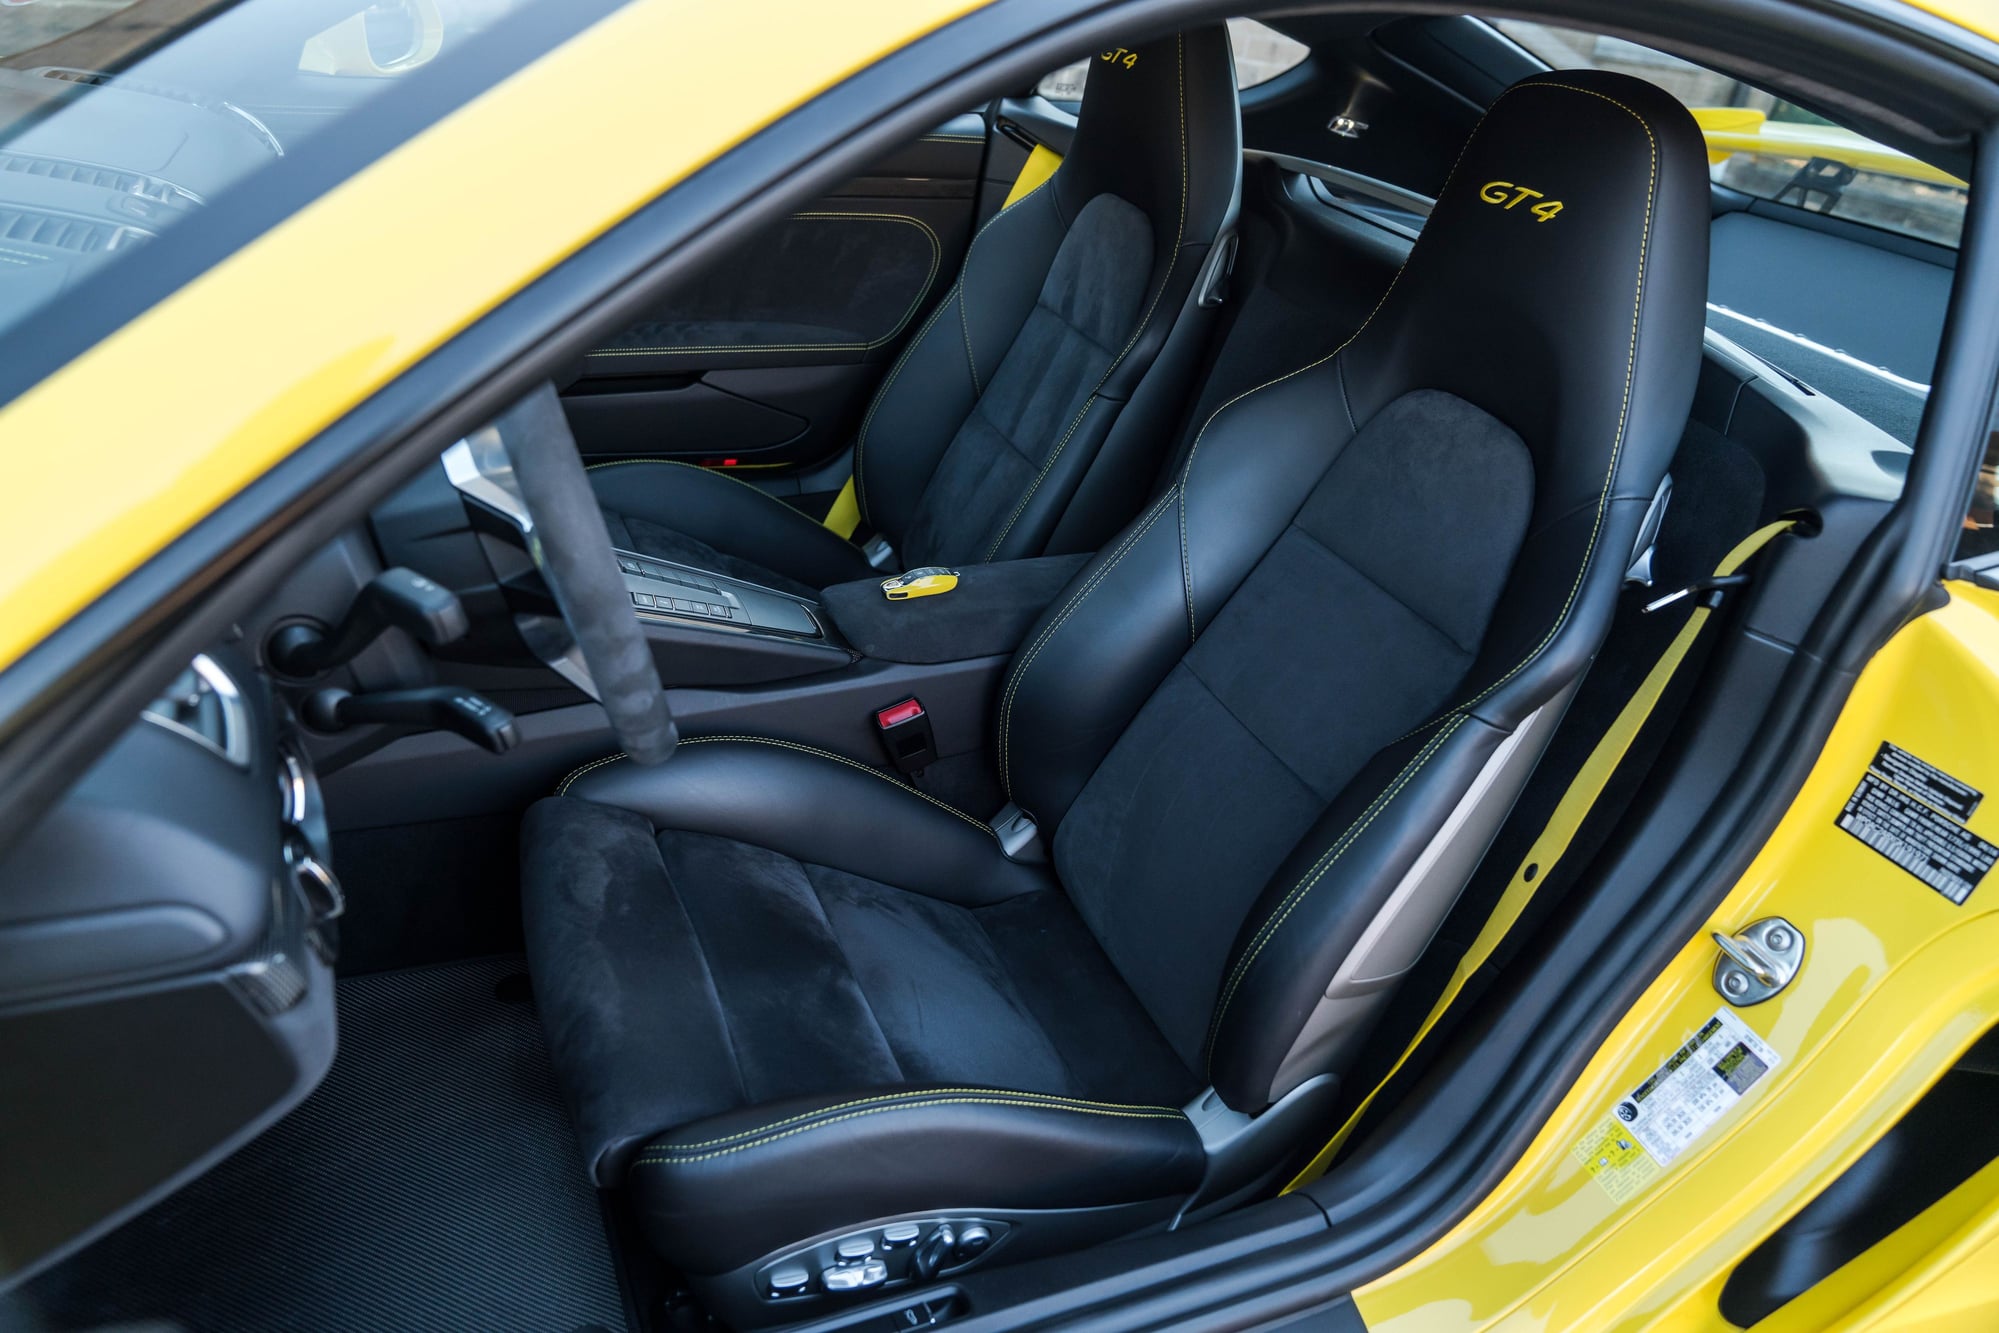 2016 Porsche Cayman GT4 - Highly optioned GT4 for sale - Used - VIN WP0AC2A8XGK191971 - 3,465 Miles - 6 cyl - 2WD - Manual - Coupe - Yellow - Wyckoff, NJ 07481, United States